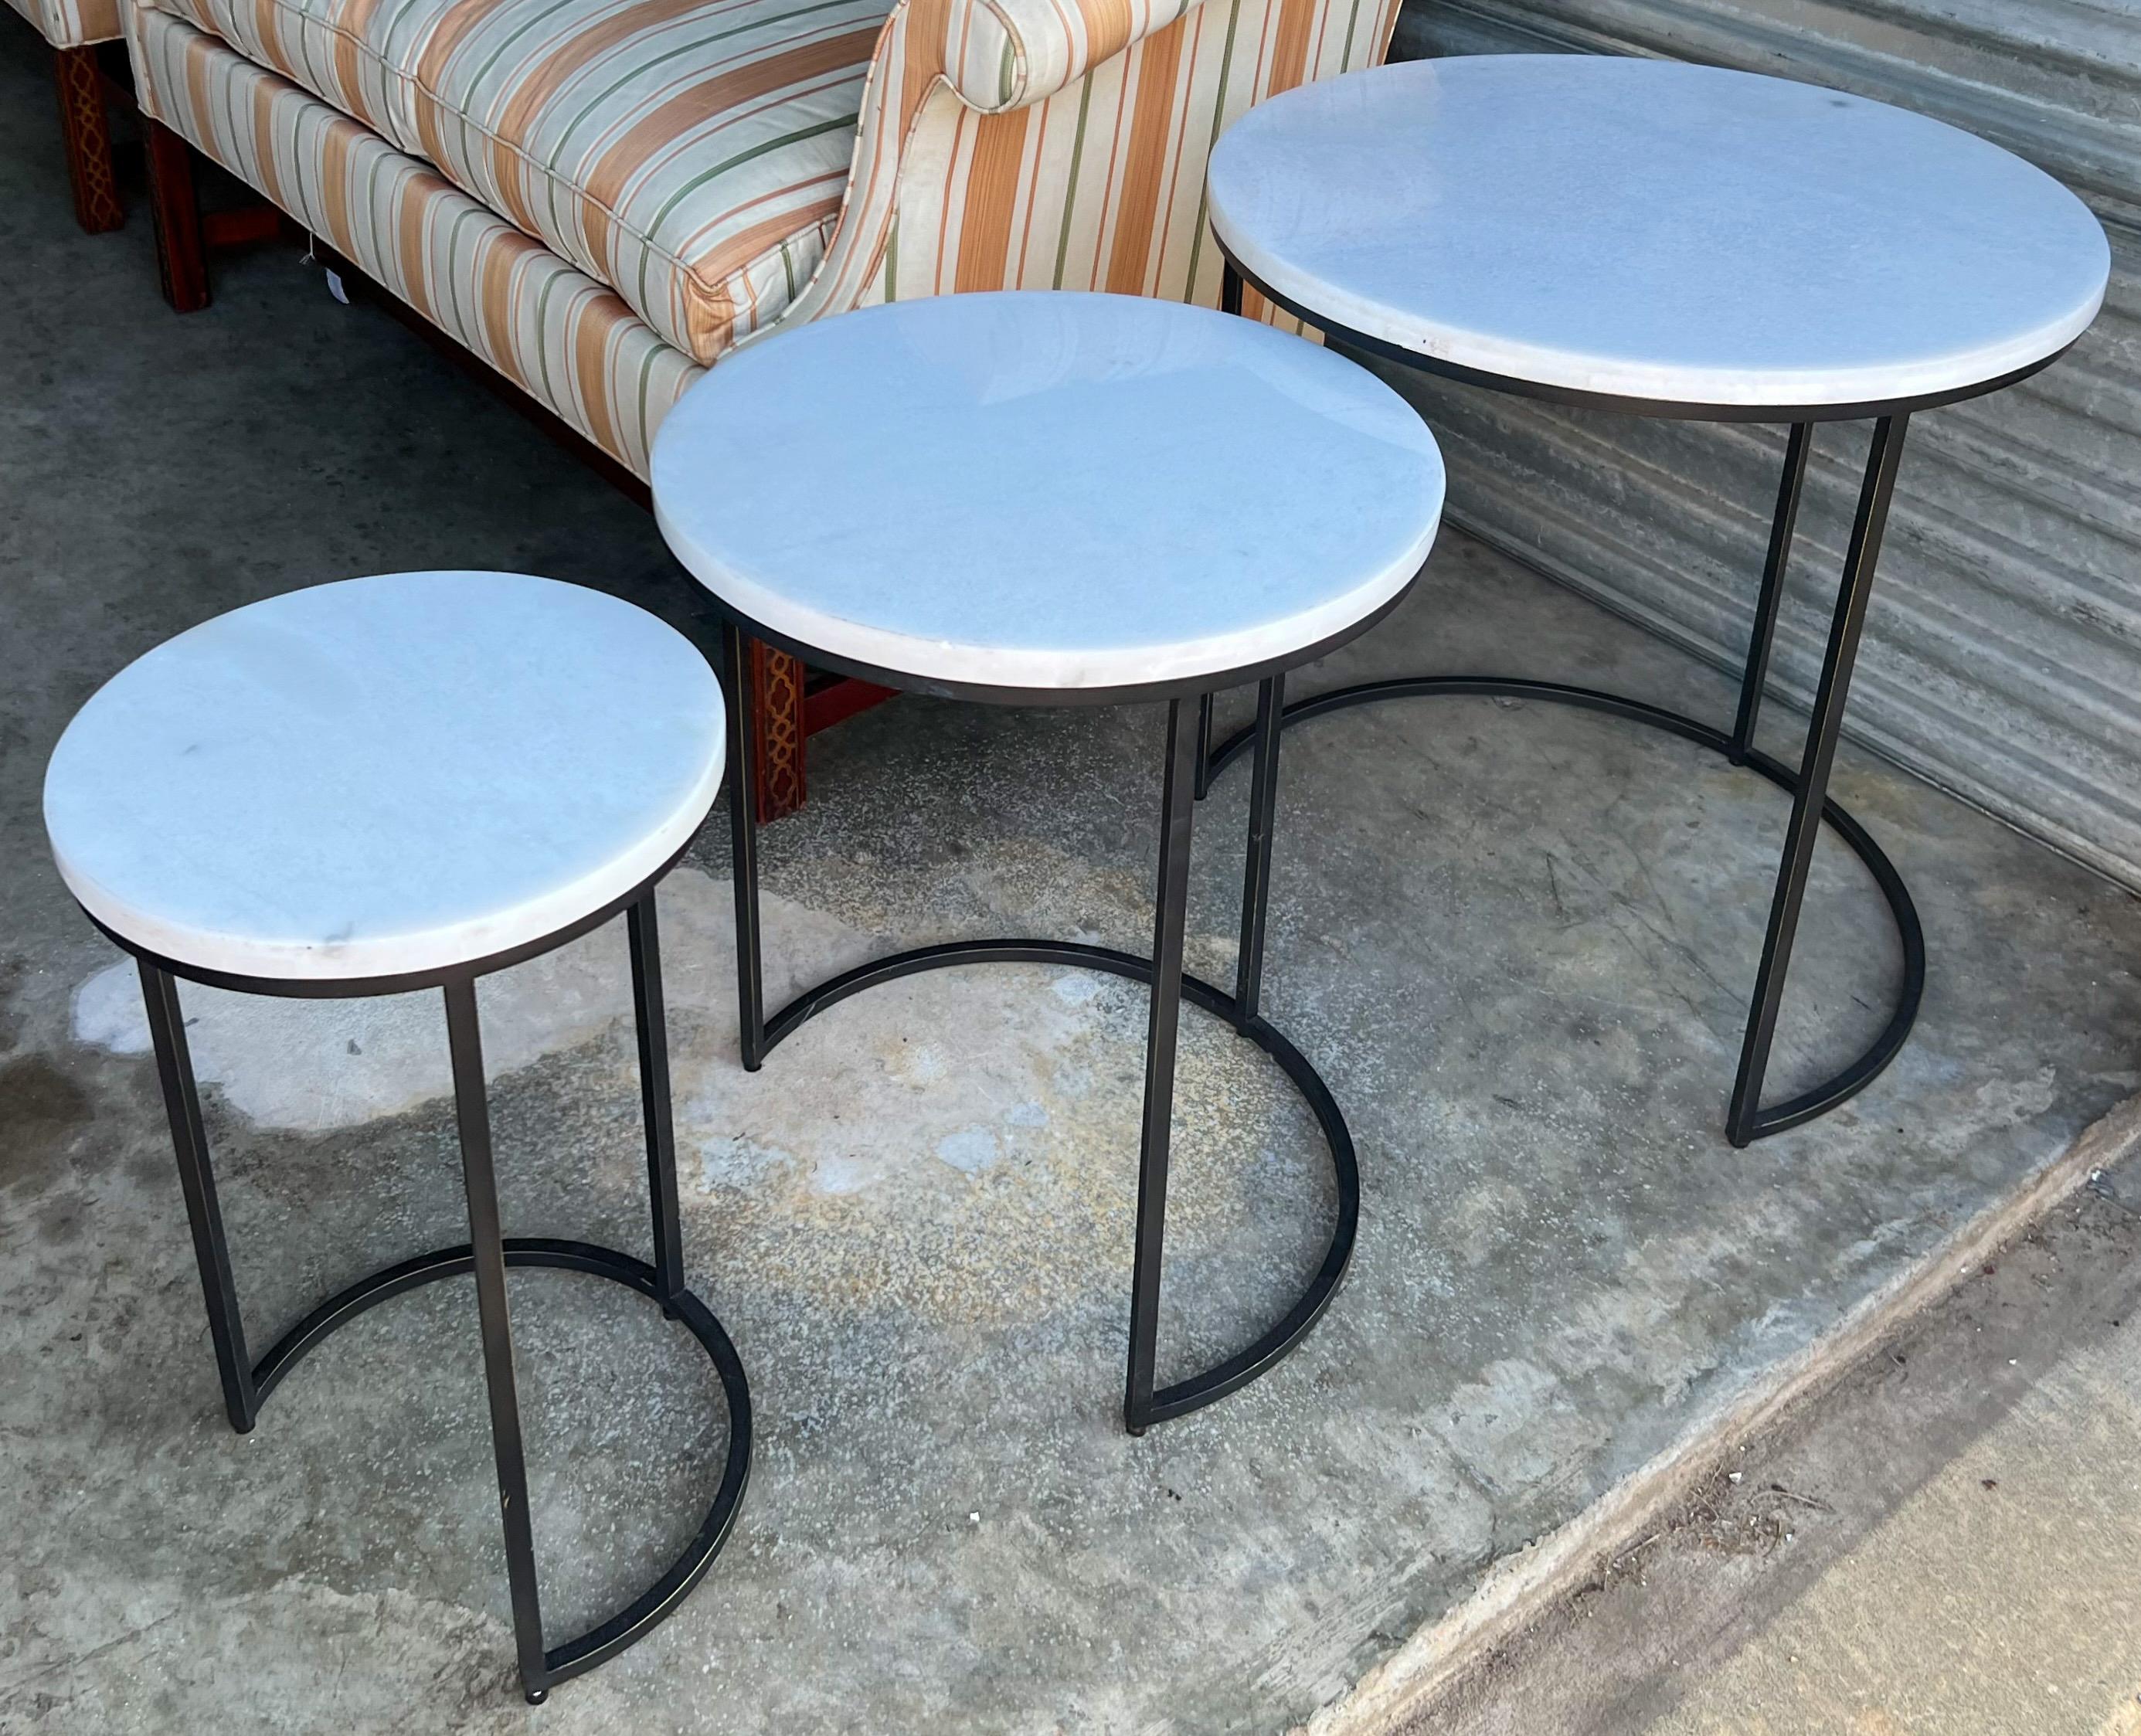 This is a late 20th century set of iron and marble set of nesting tables by Mitchell Gold and Bob Williams. The smallest is 12 inches in diameter and 19” high. They are in very good condition.